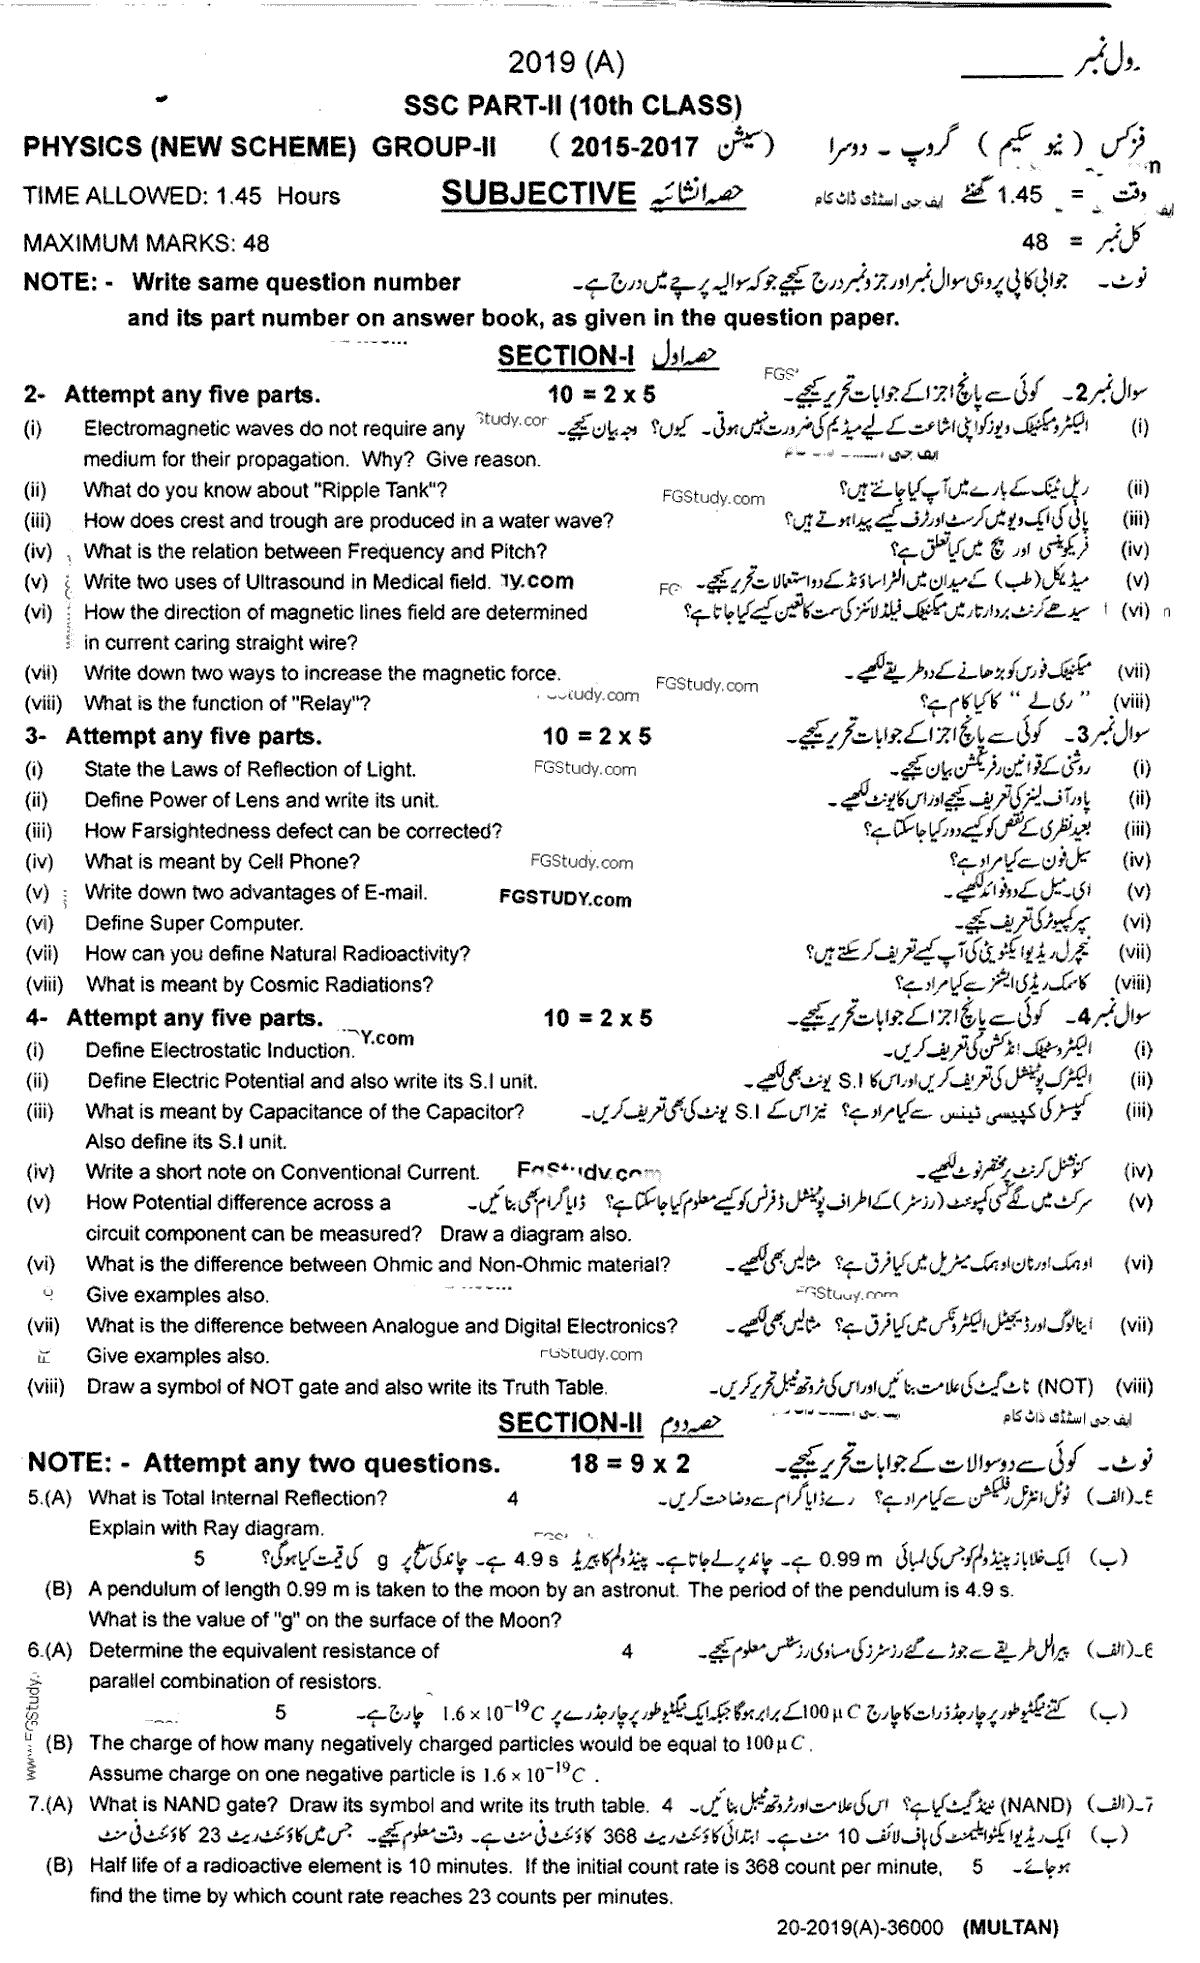 Physics Group 2 Subjective 10th Class Past Papers 2019